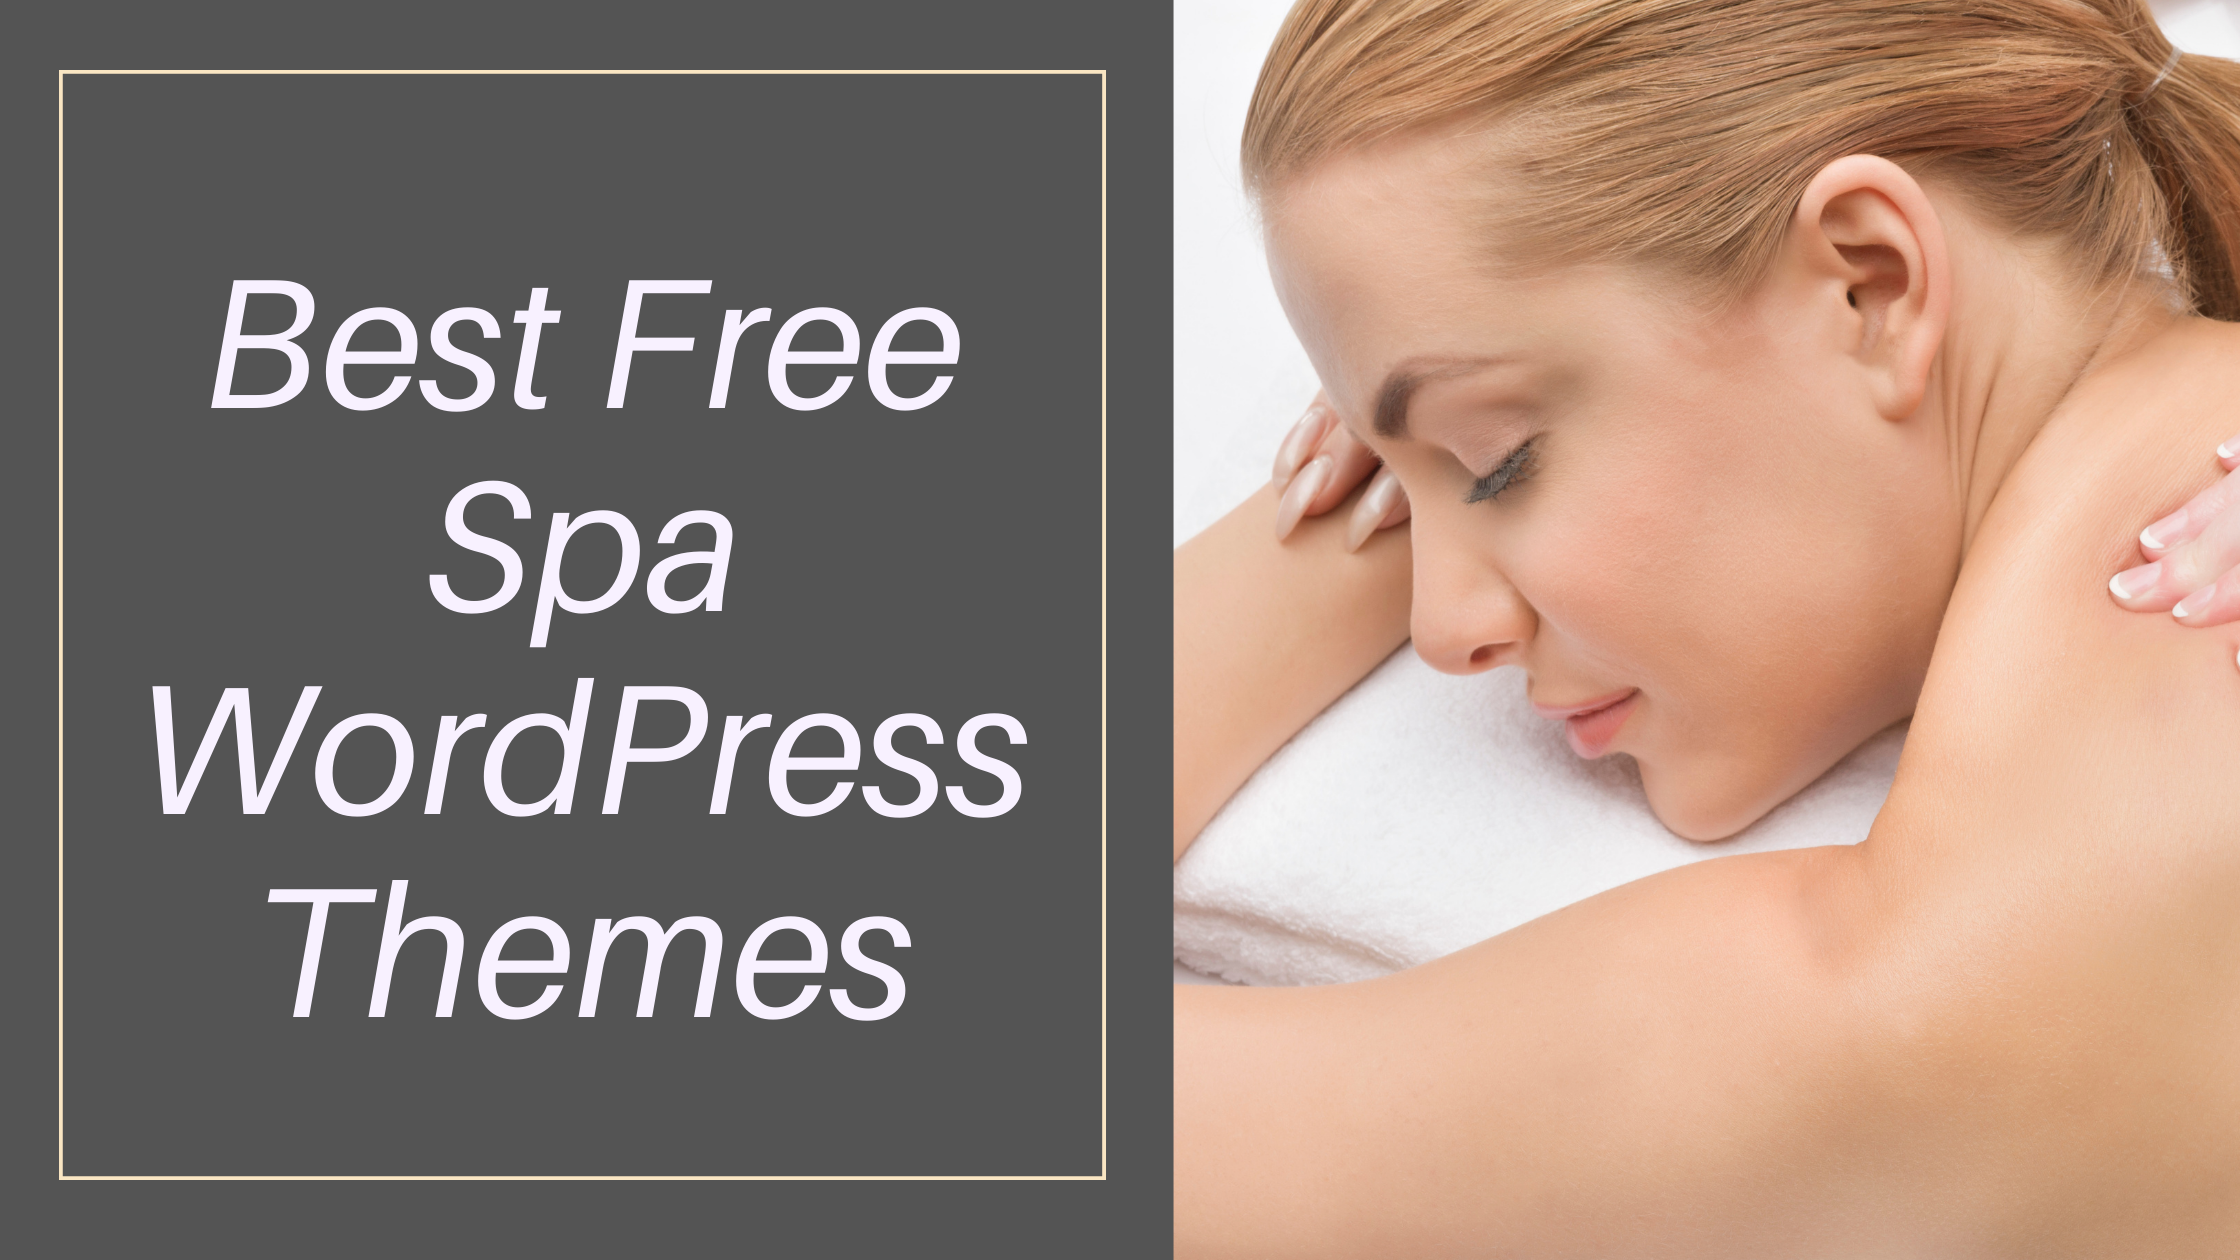 Best Free Spa WordPress Themes For Your Business Needs post thumbnail image